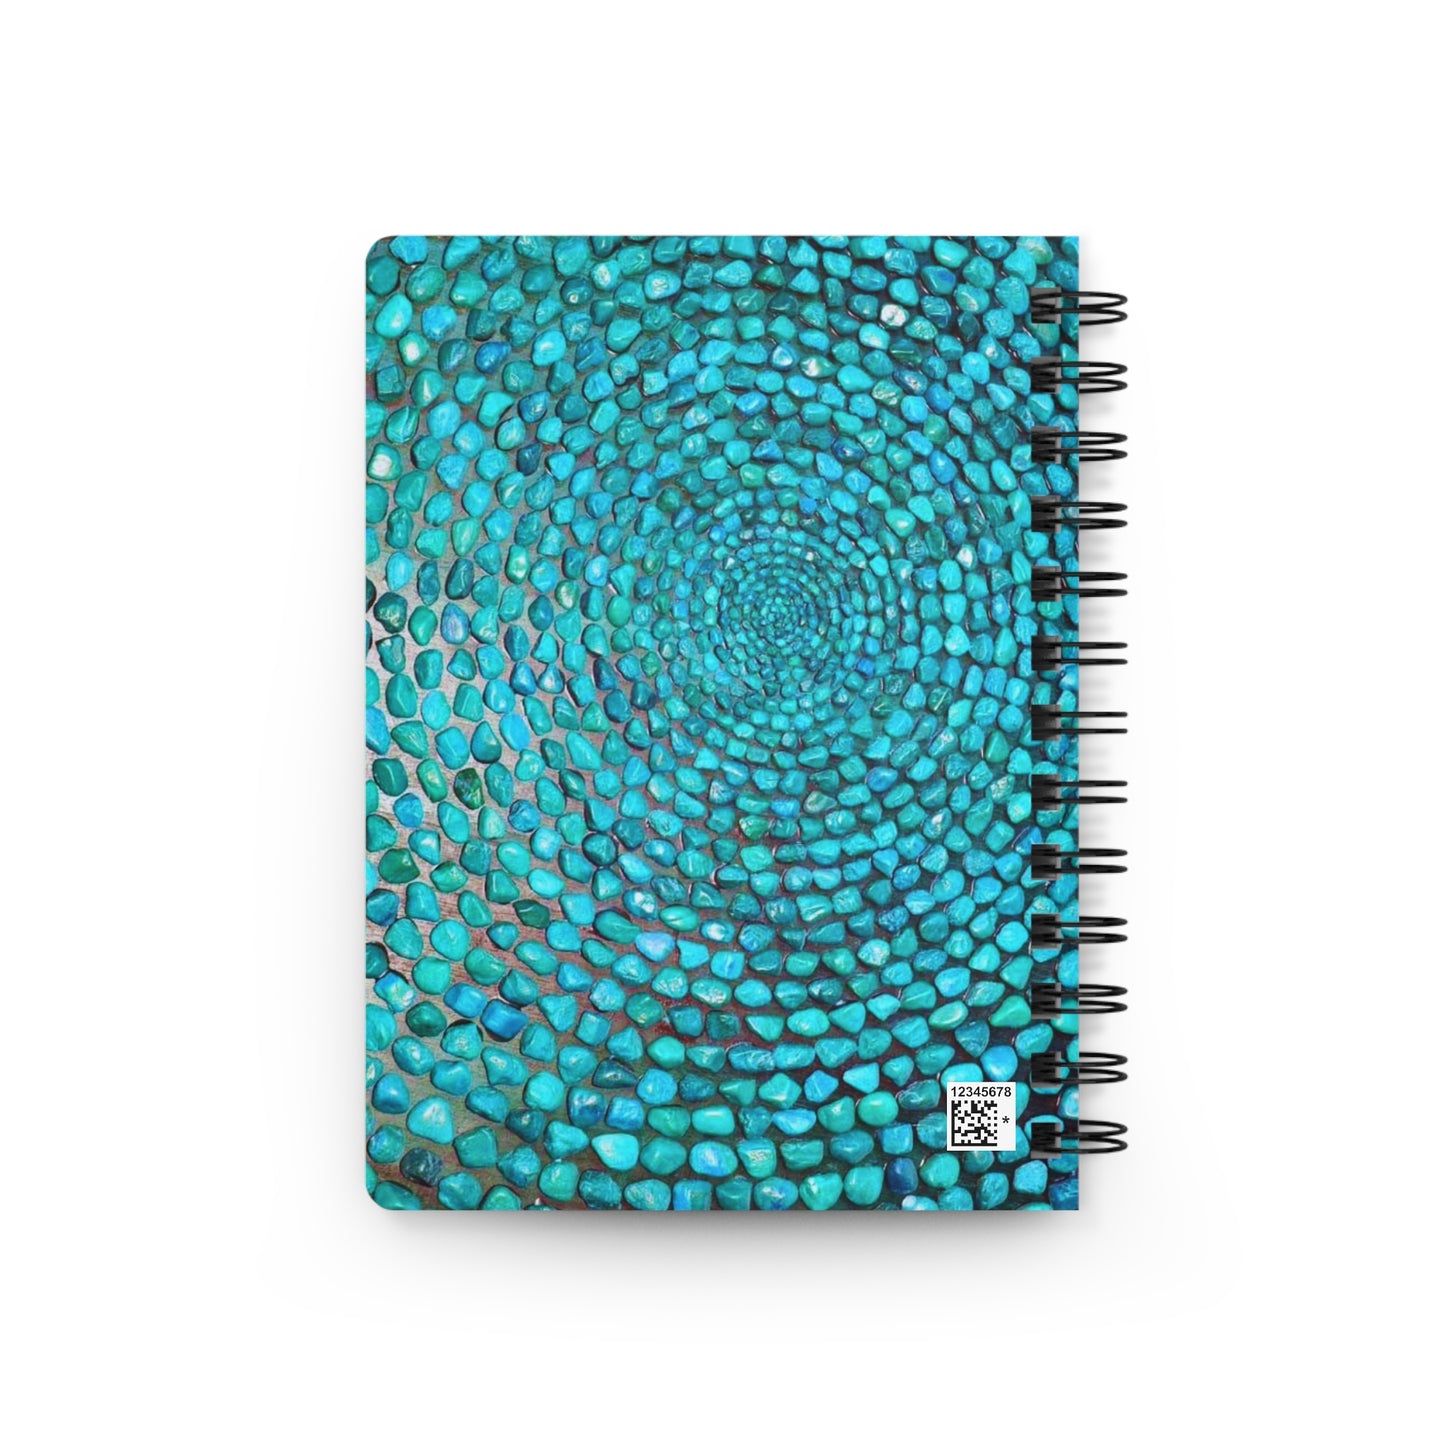 Turquoise Stone Writing Sketch Inspiration Travel  Spiral Bound Journal